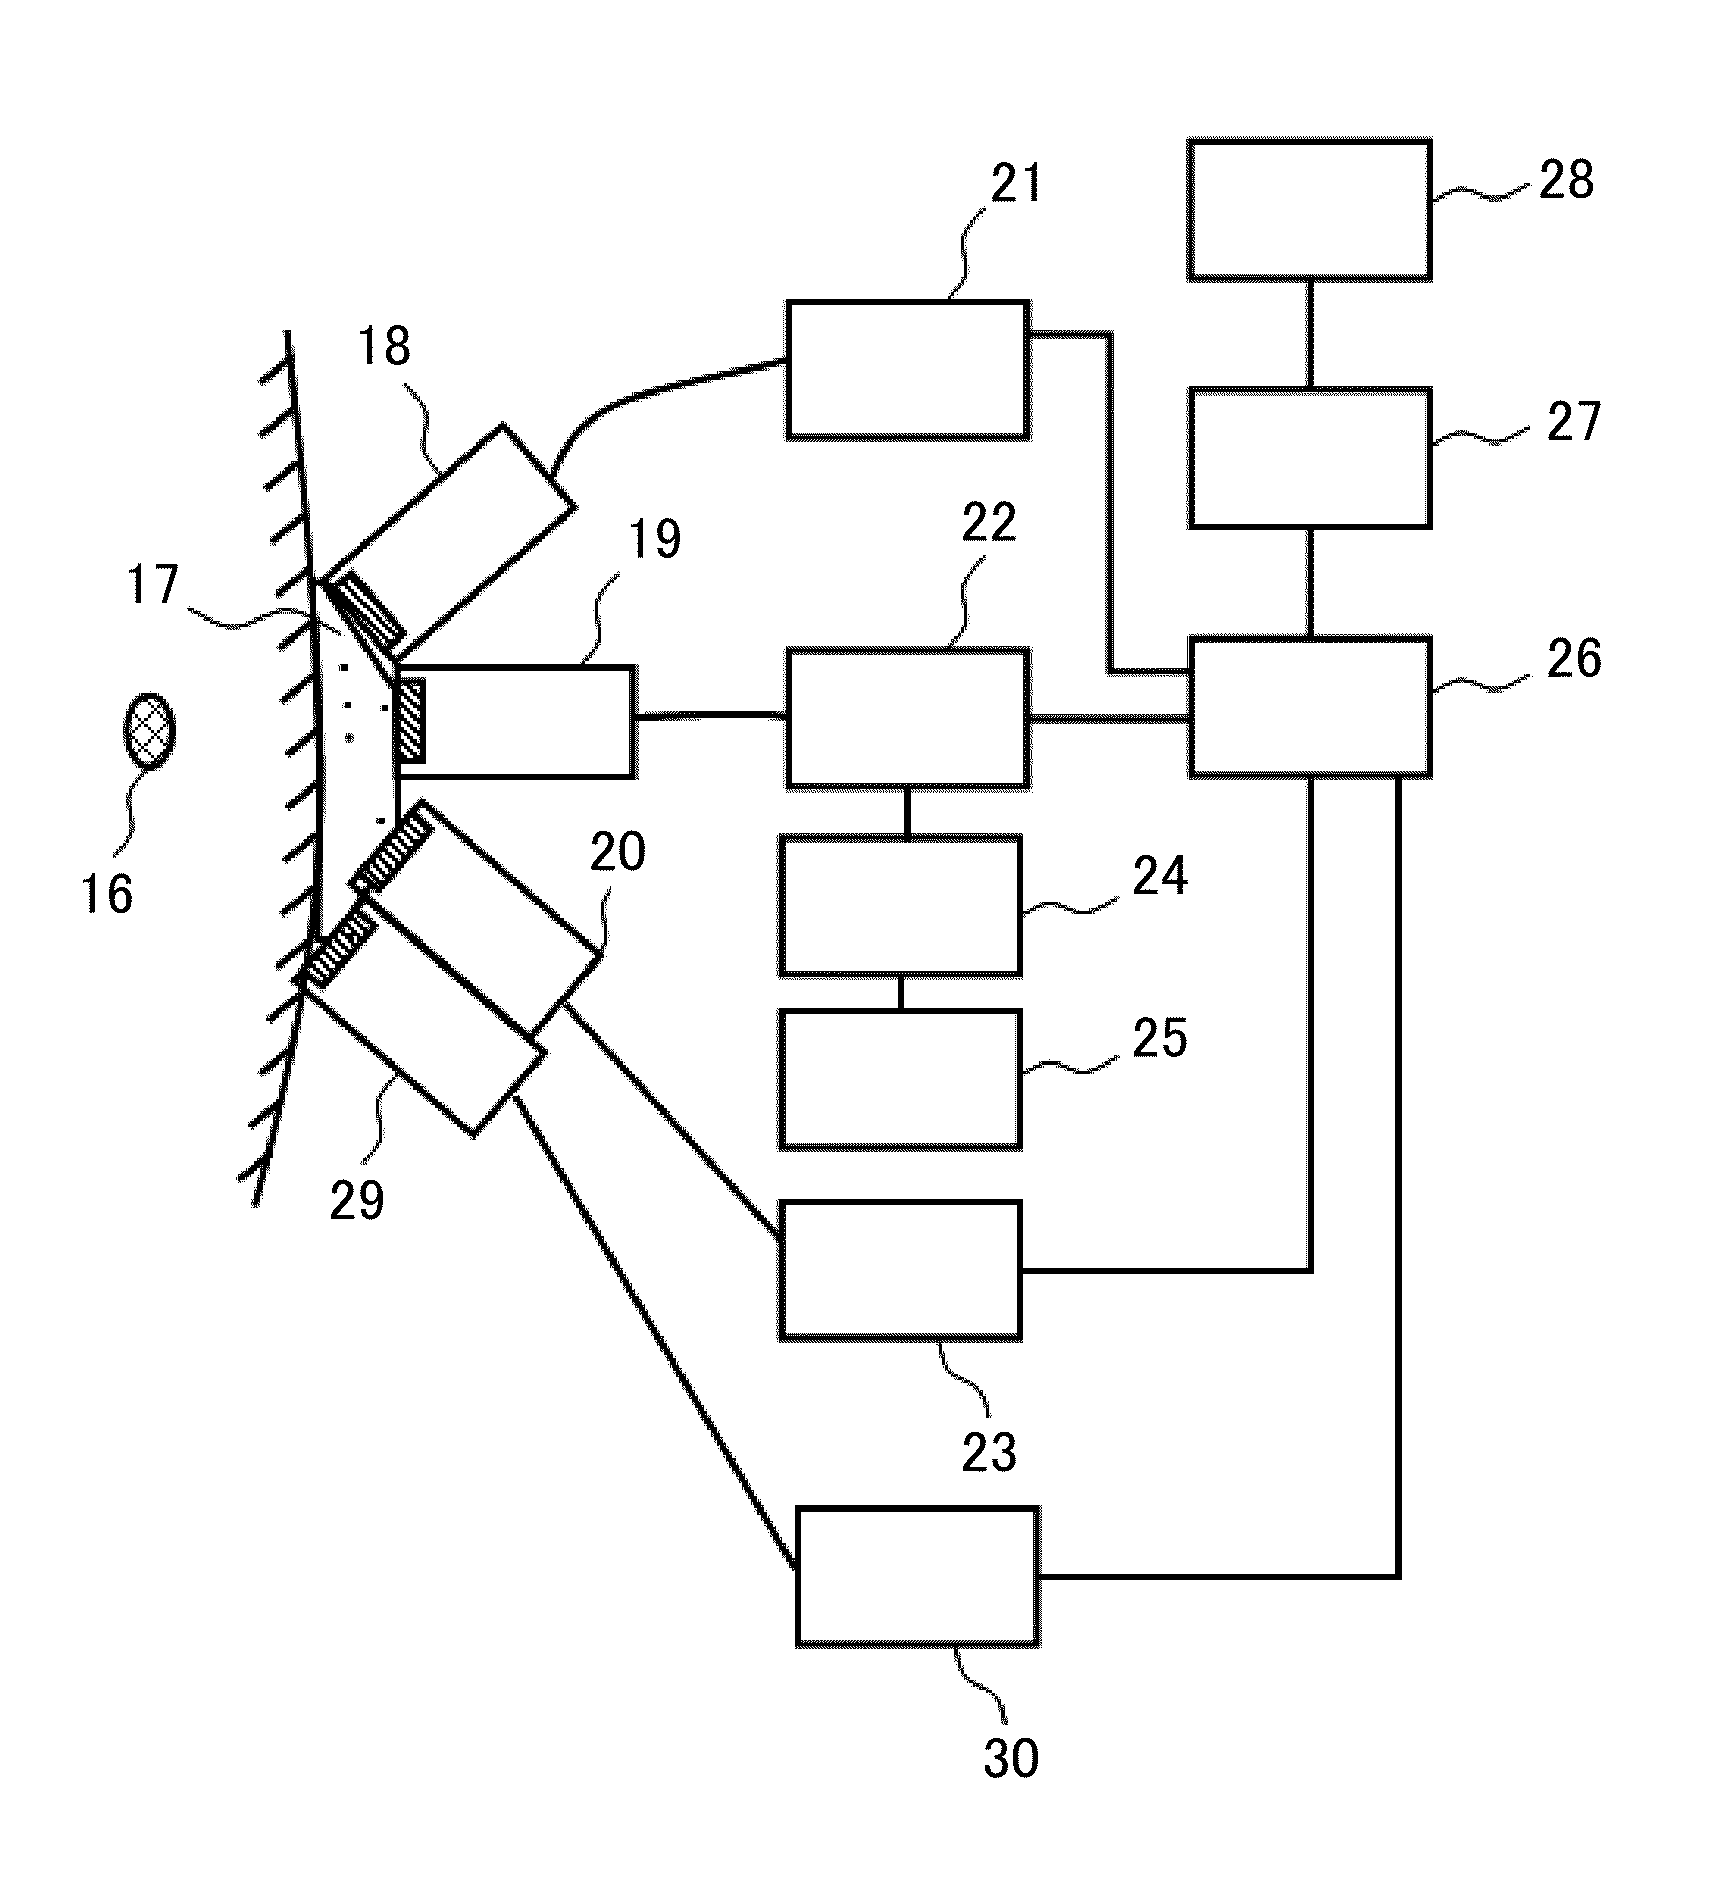 Ultrasound diagnostic and treatment device